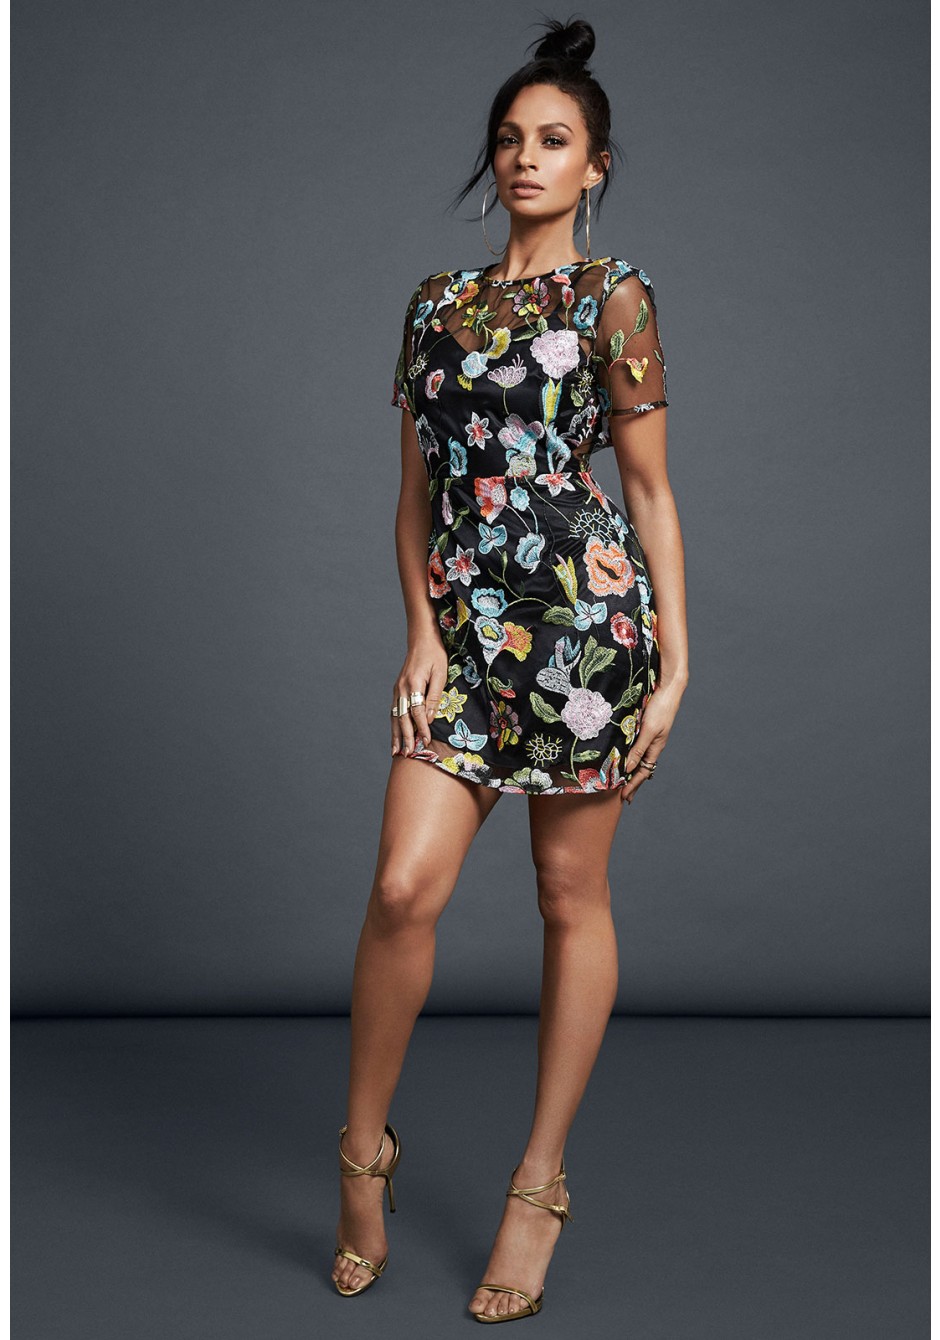 Alesha Dixon Flower Embroidered Mini Dress with Sheer Detail 